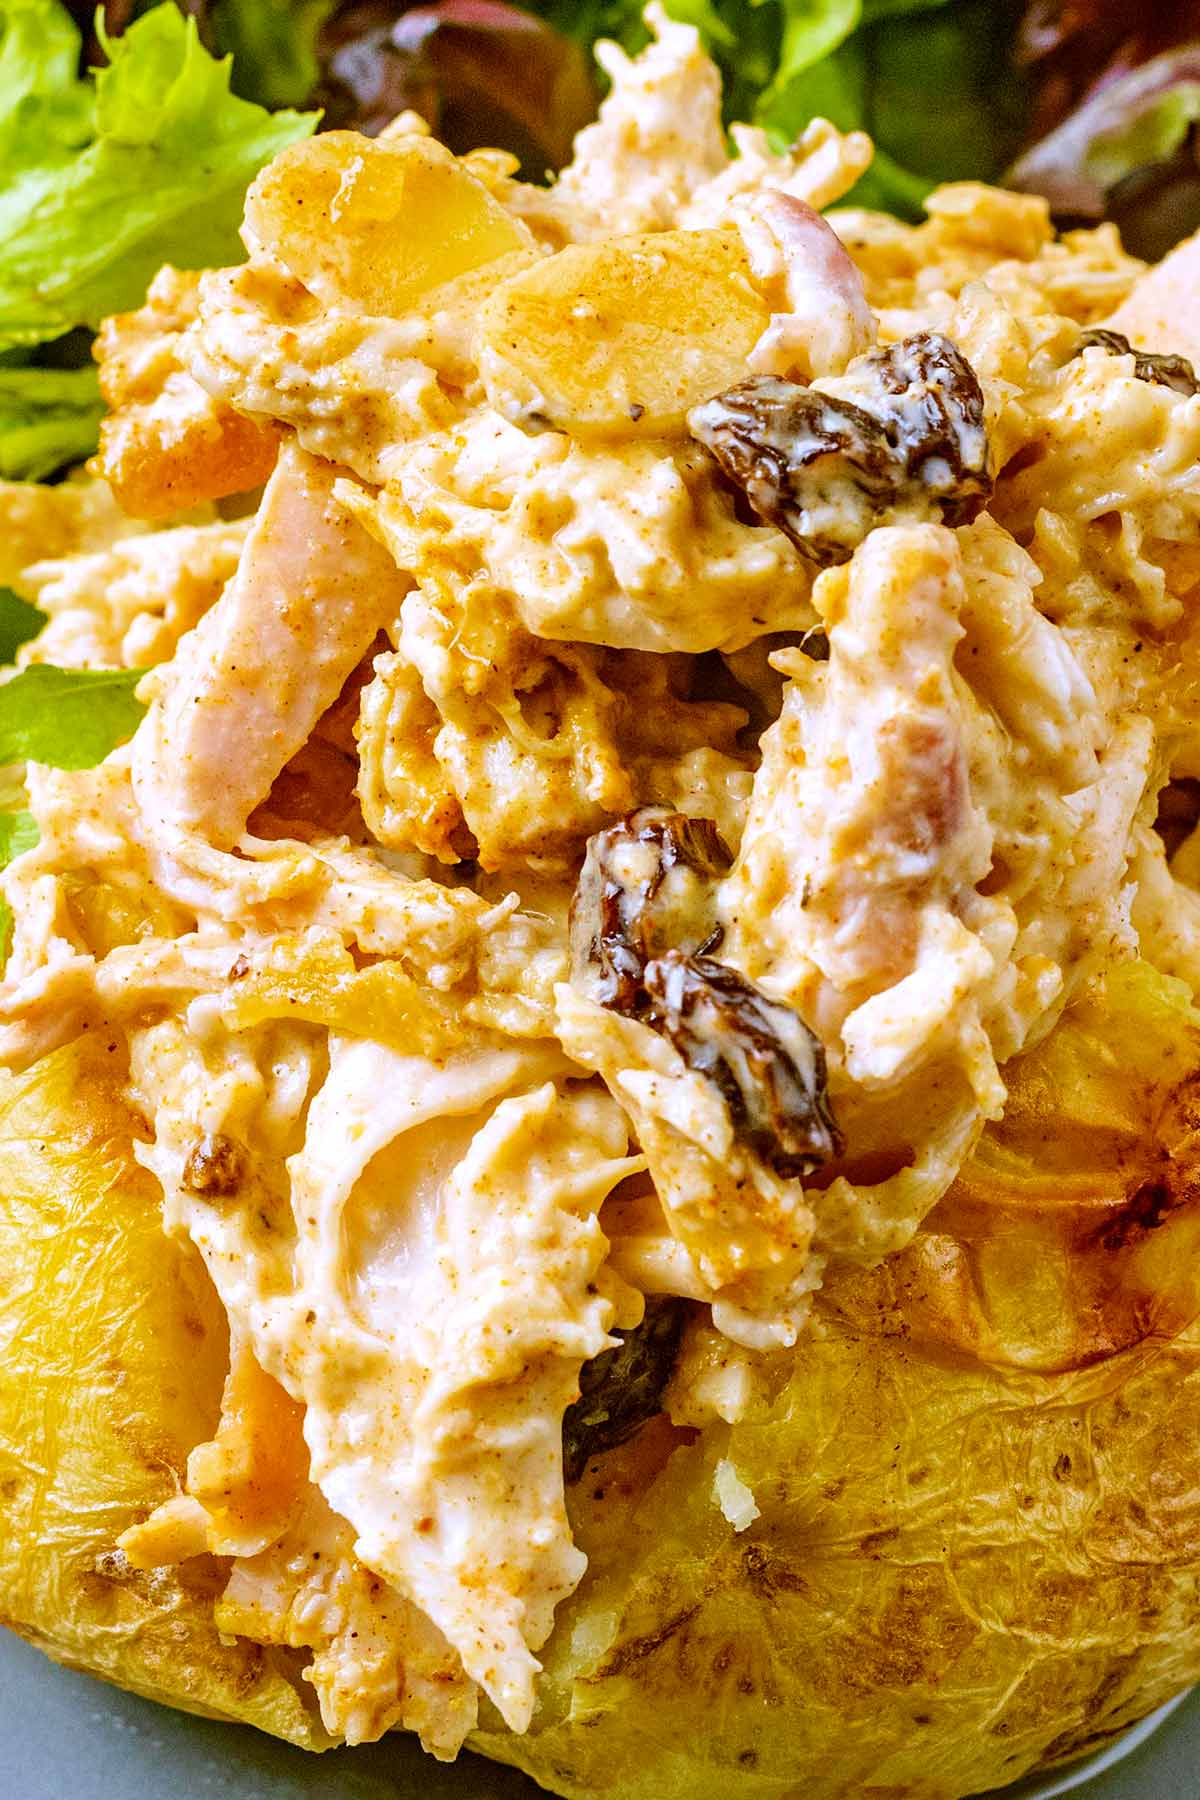 Coronation chicken falling off the side of a baked potato.